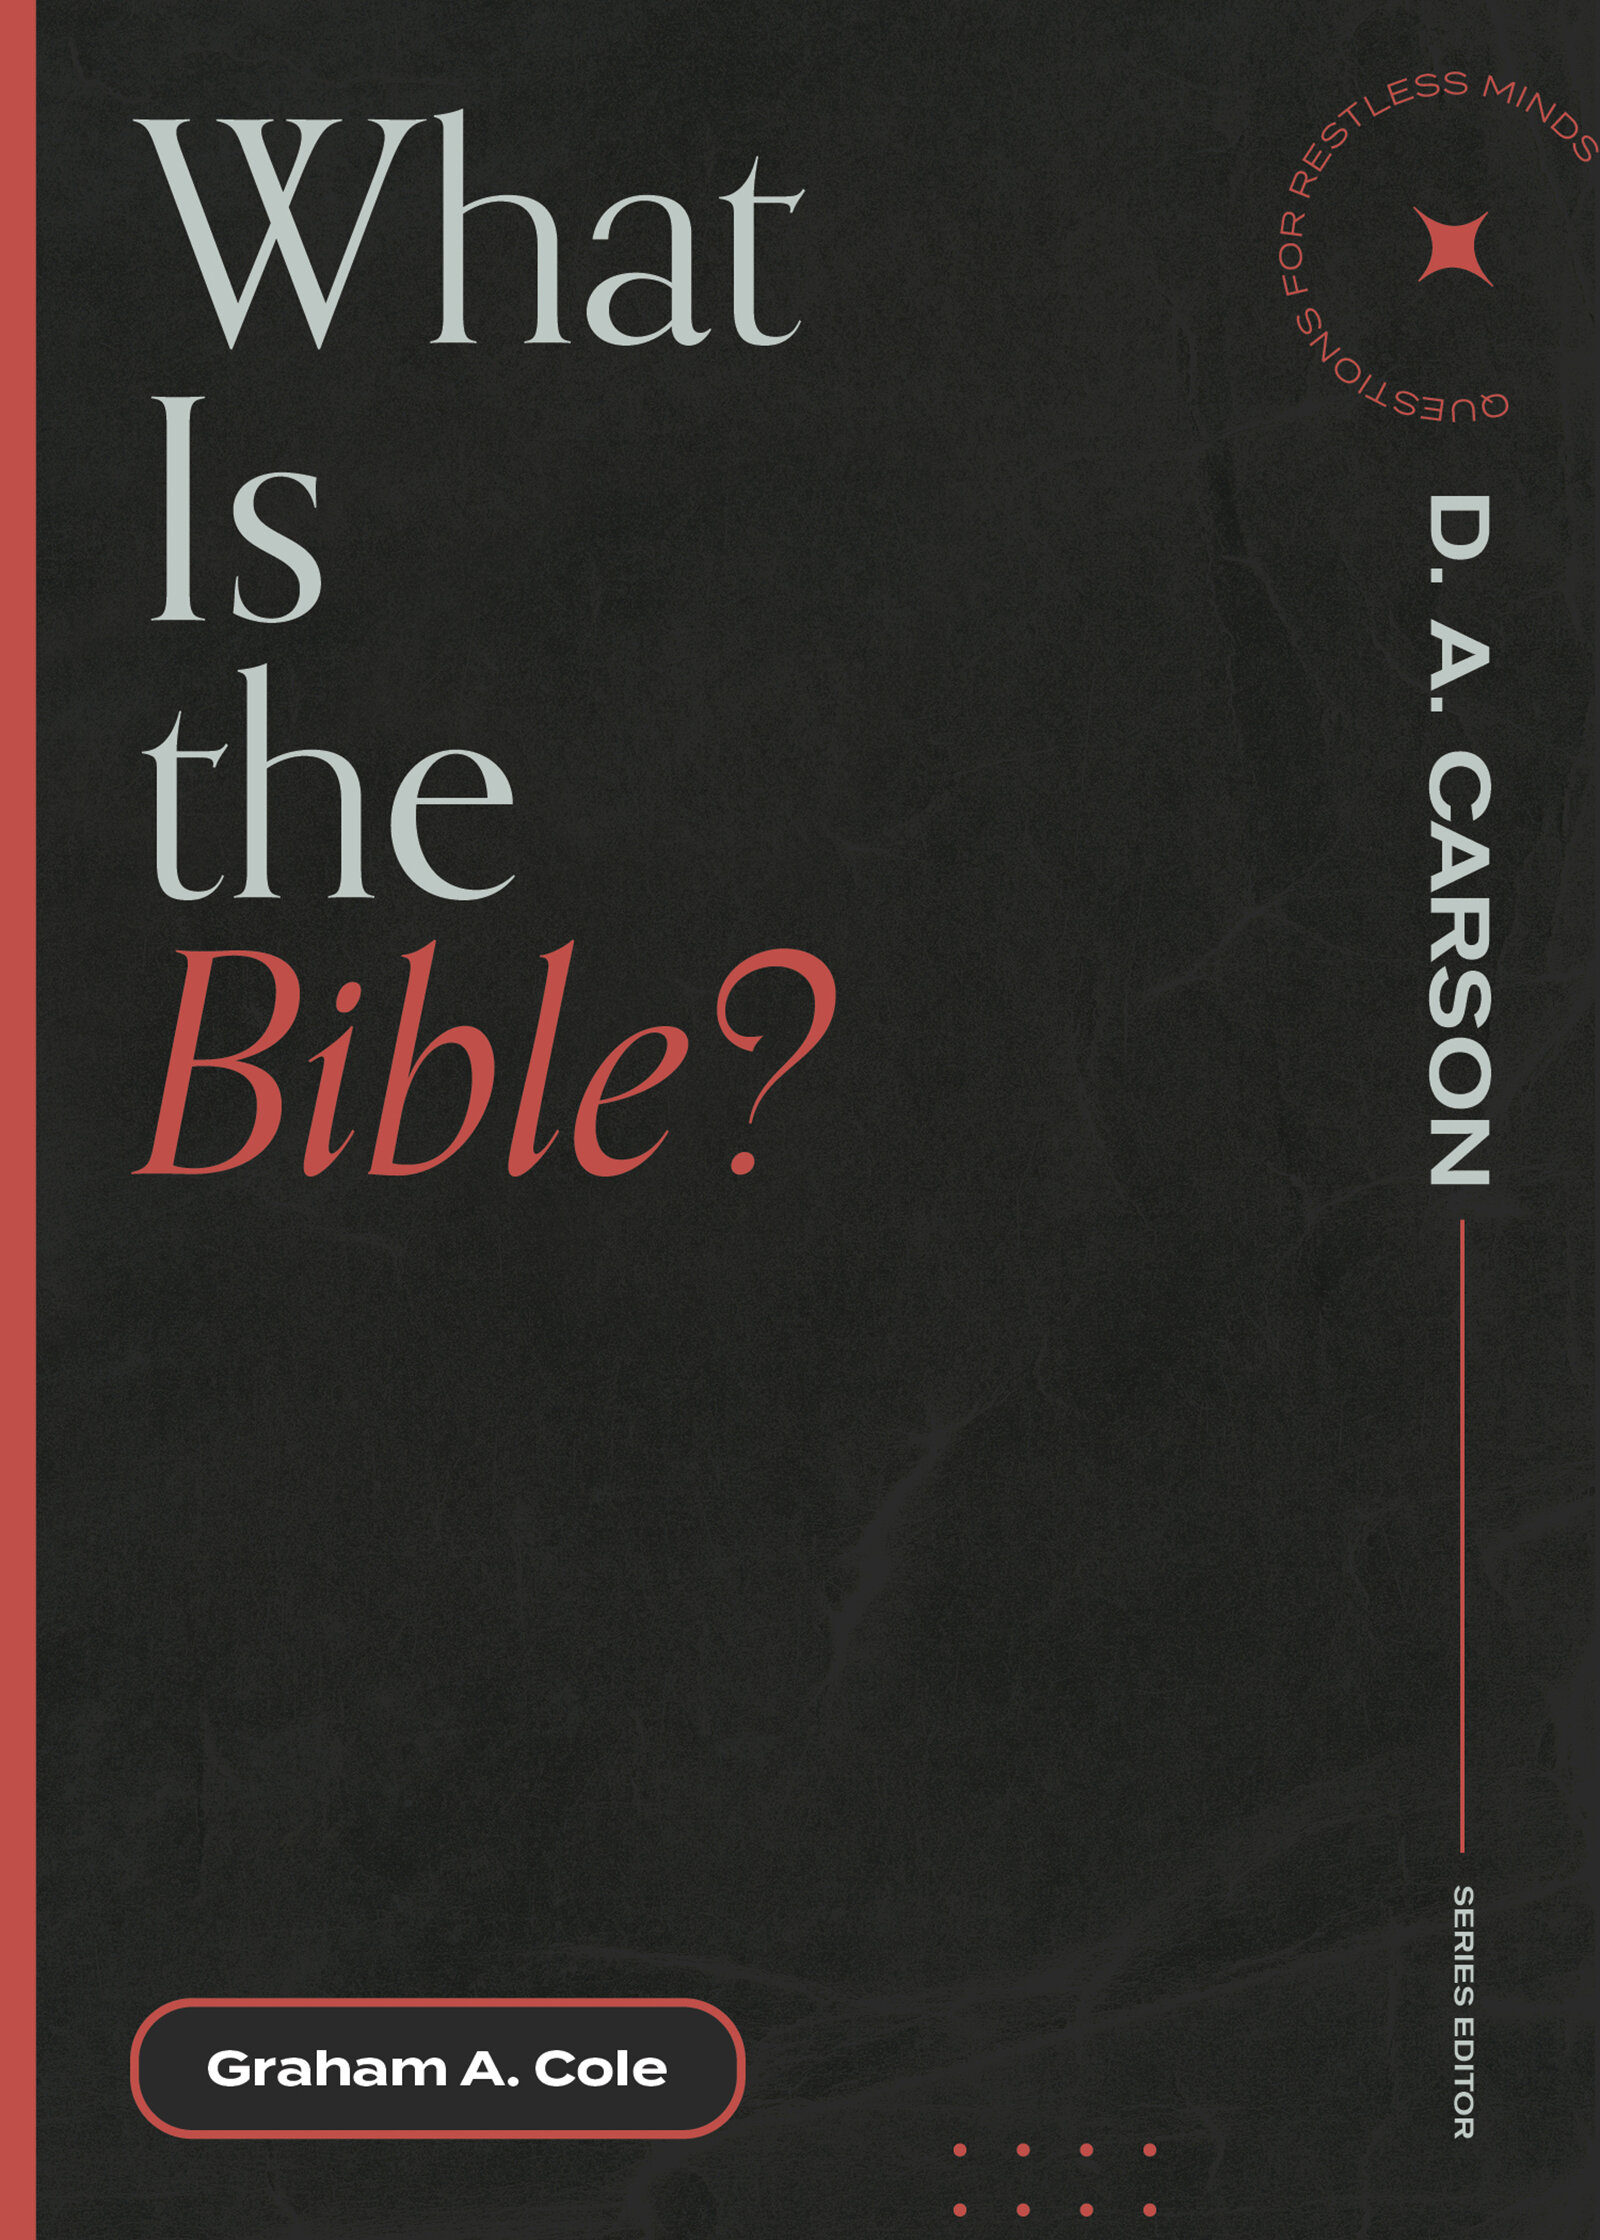 What Is the Bible? (Questions for Restless Minds)